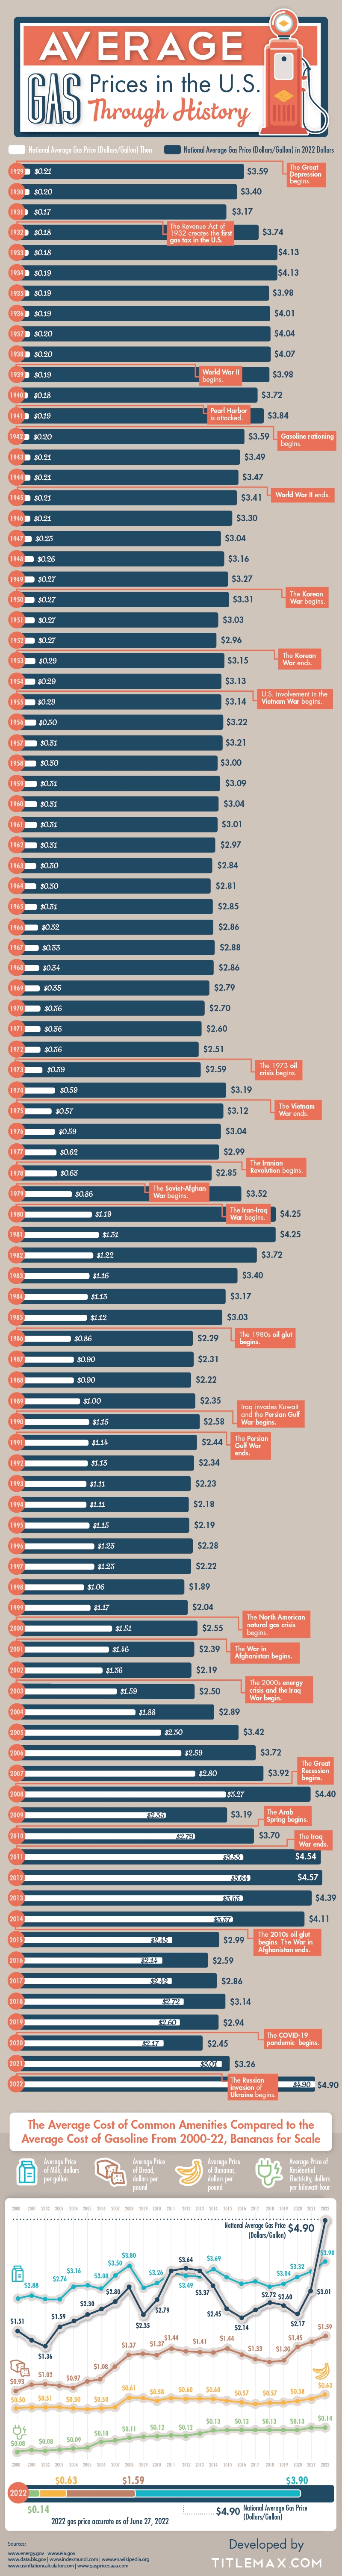 Average Gas  Prices In The U.S Through History||Best Infographic|| ||infographic s||